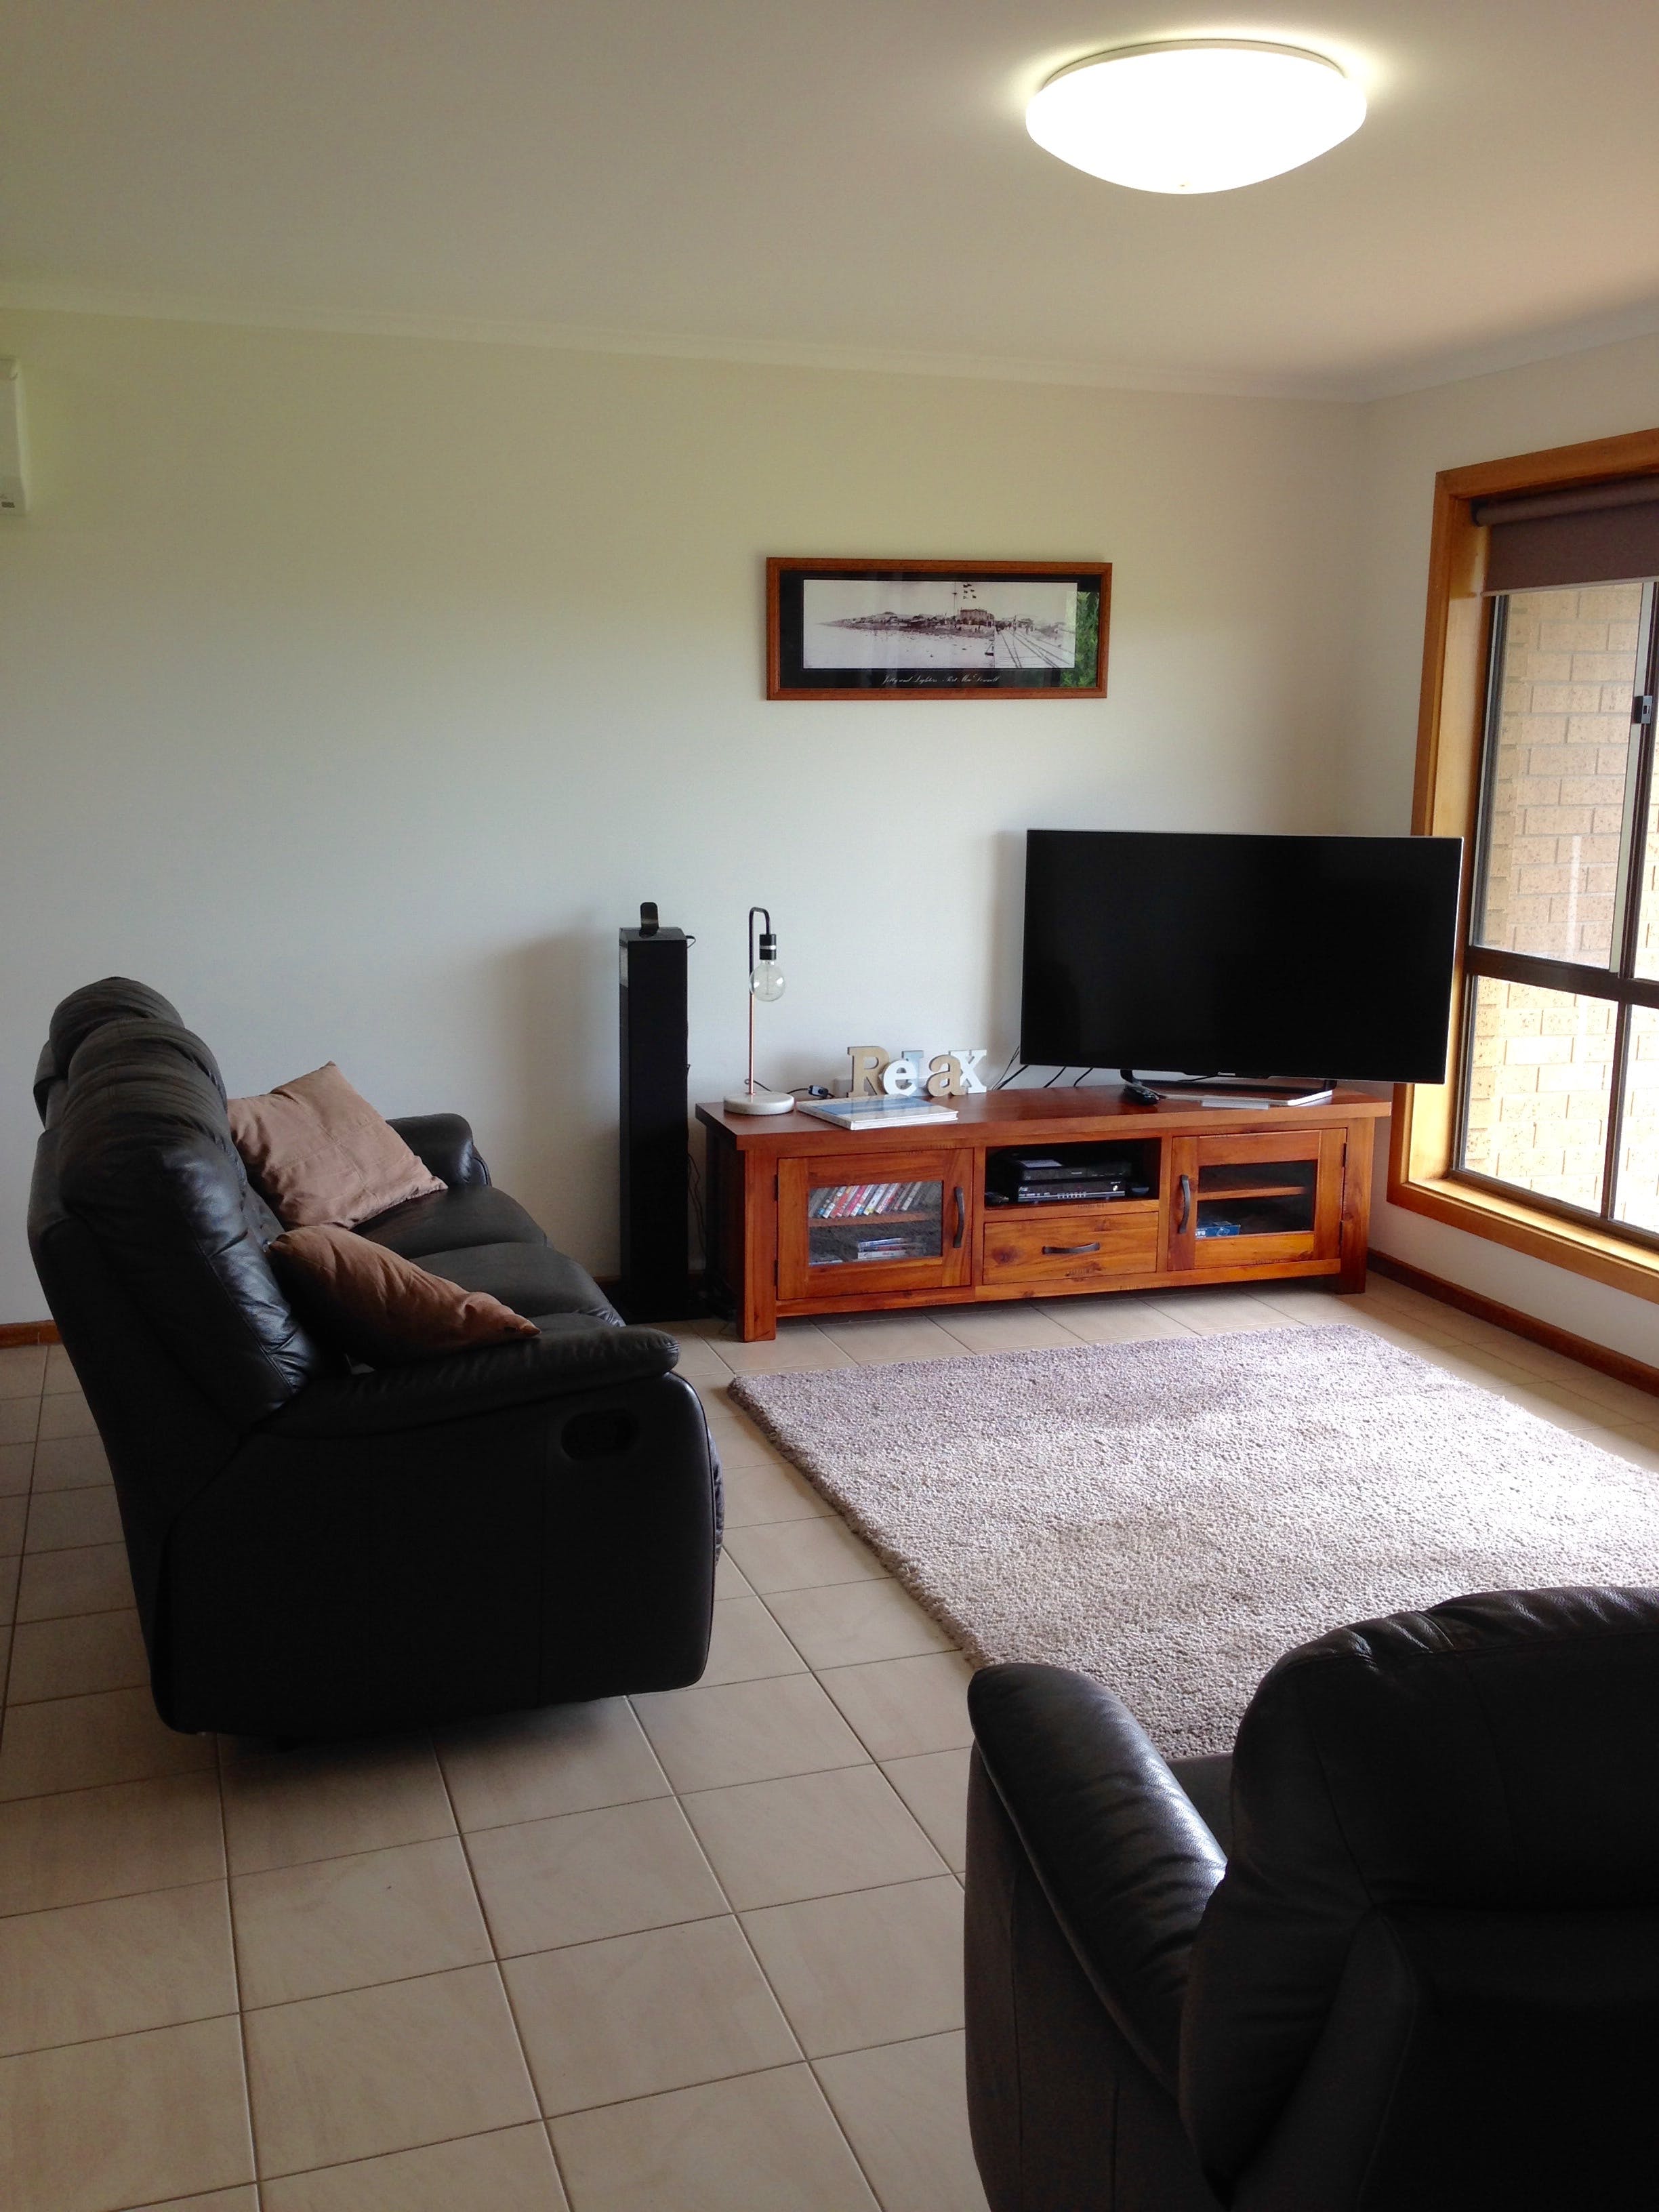 Springs Beach House - Lismore Accommodation